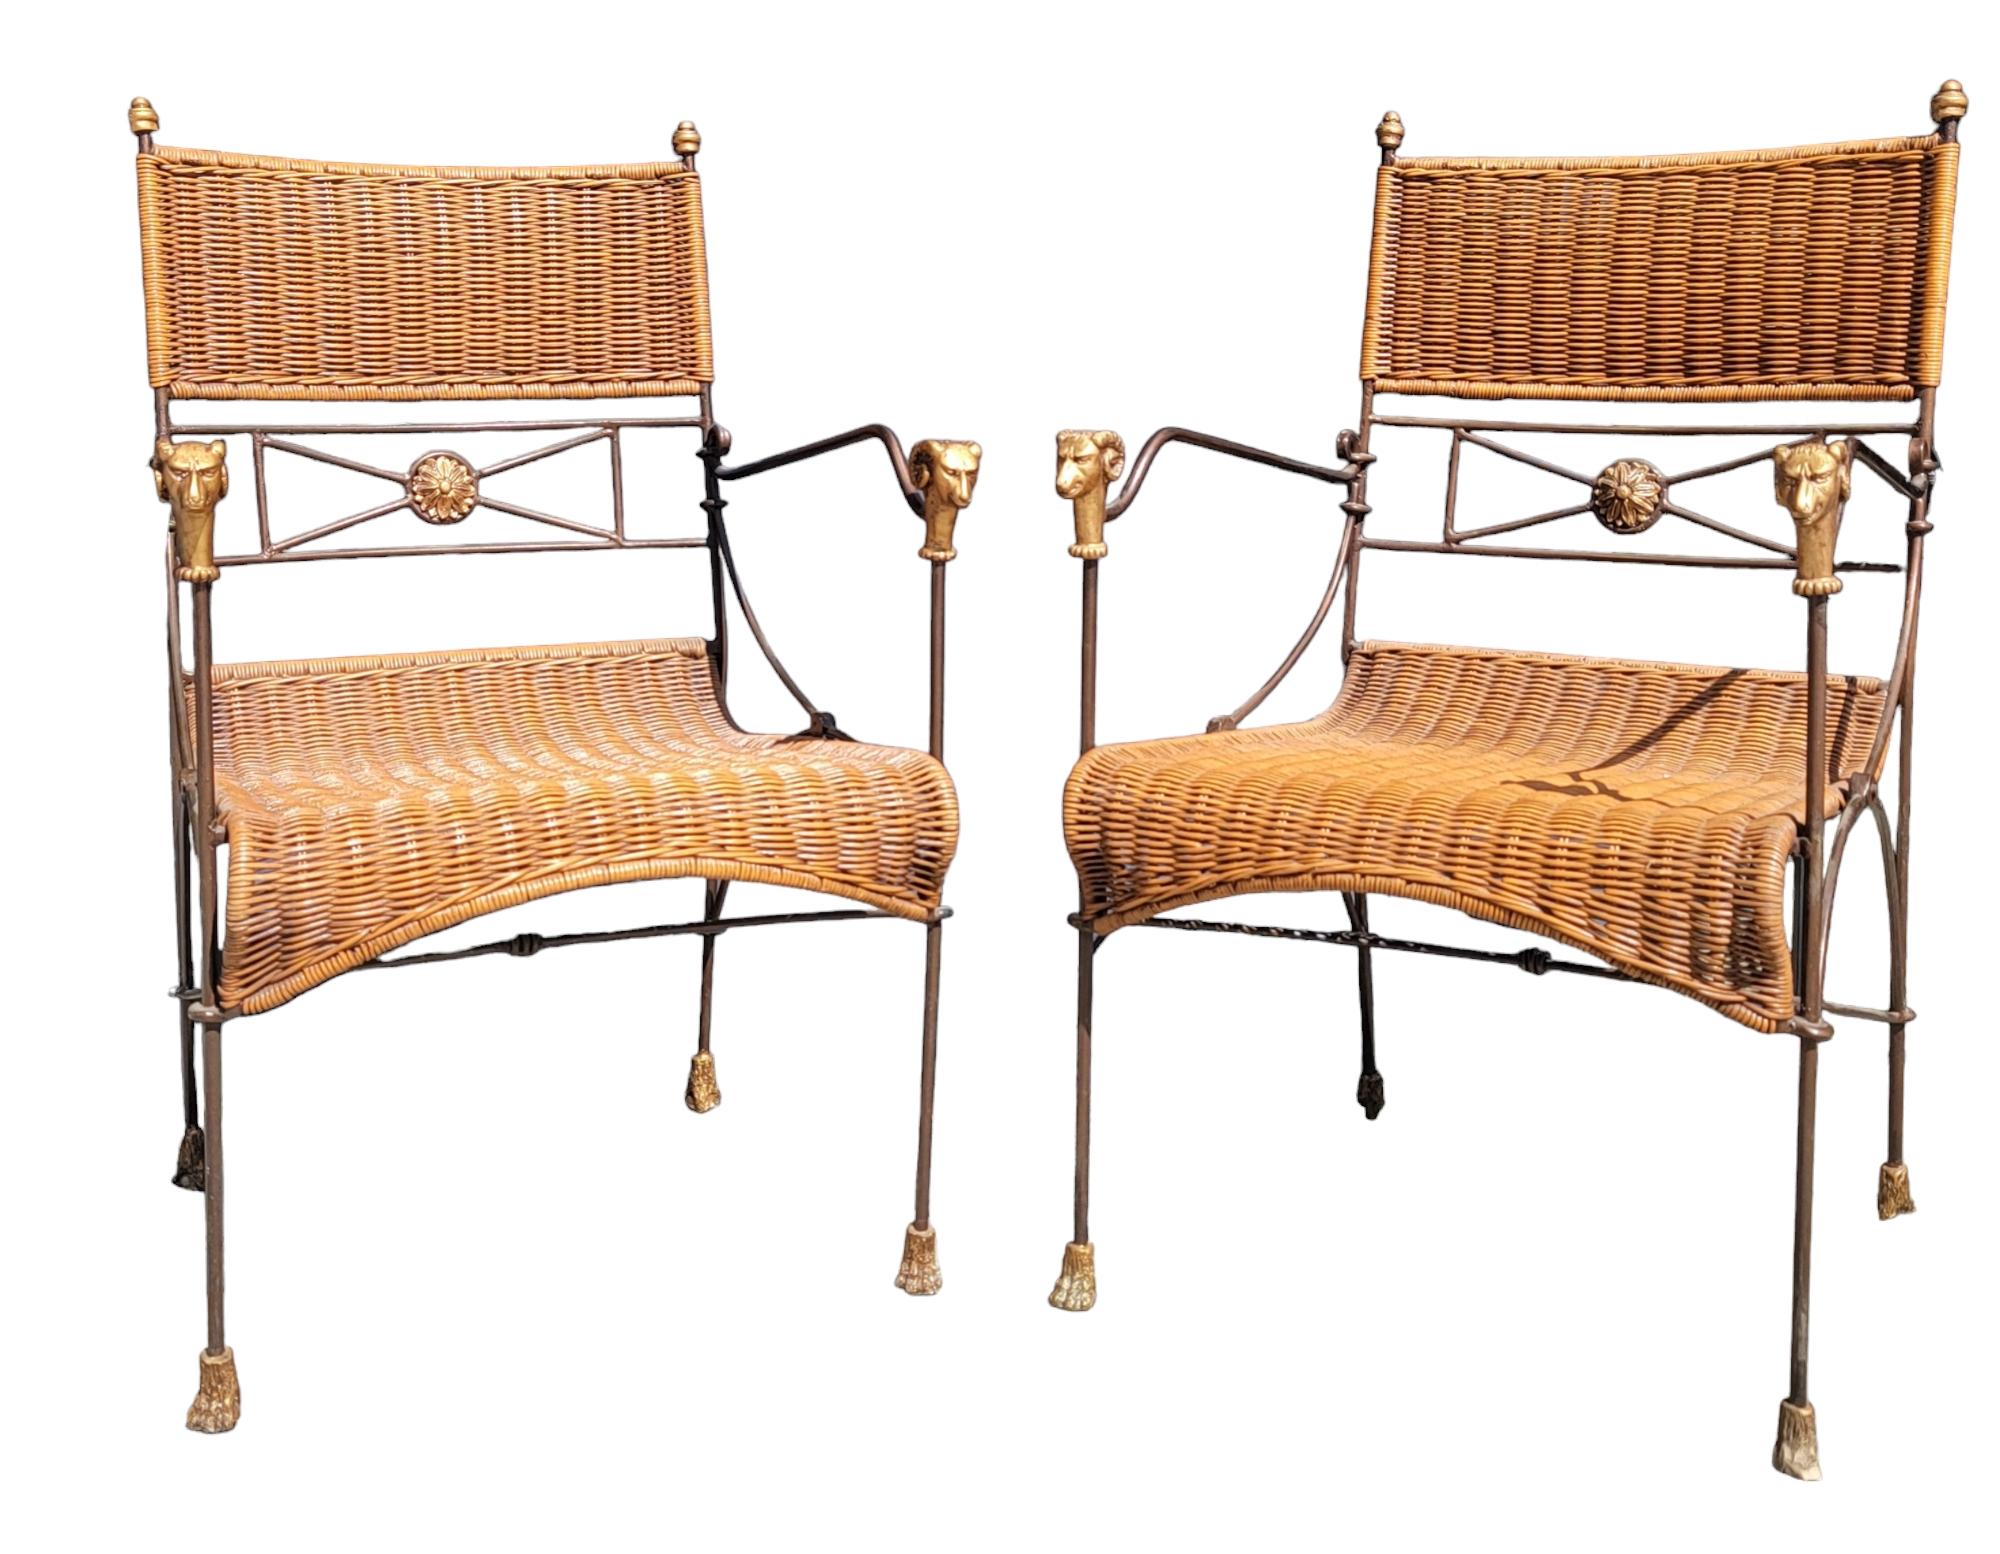 Set of Three Iron And Wicker Settee And Chair By Giacometti  3